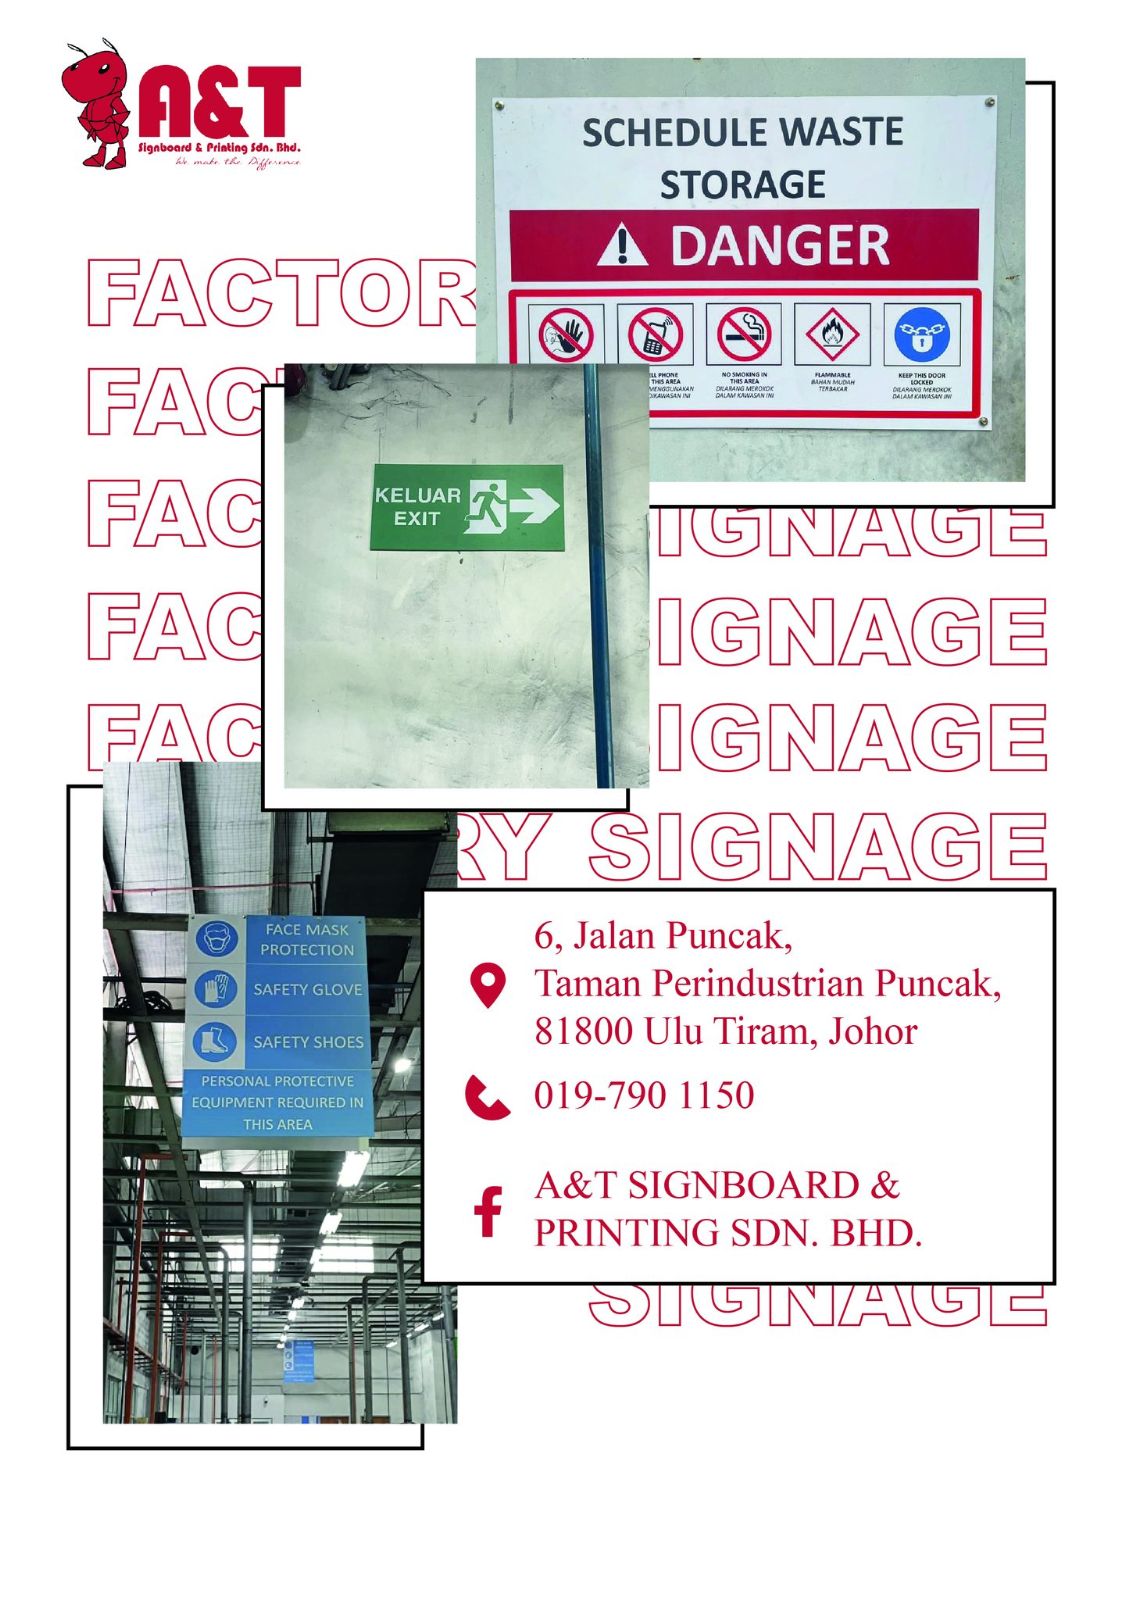 Safety Signage for Factory